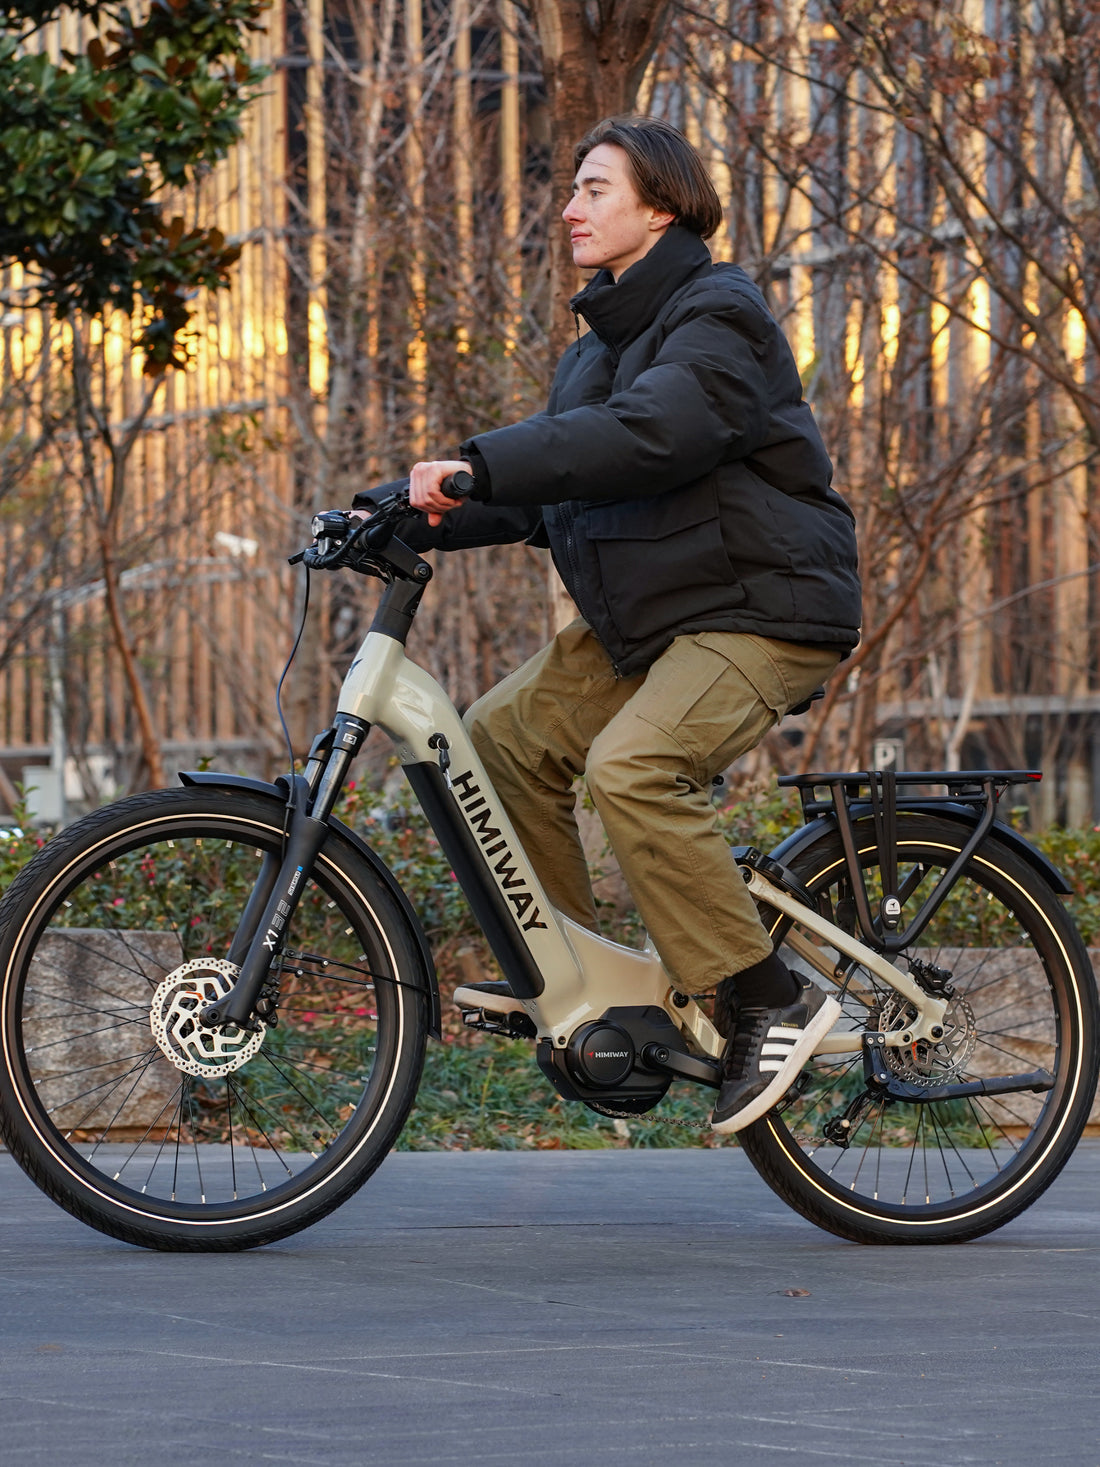 Himiway A7 Pro | Urban Electric Commuter Bike